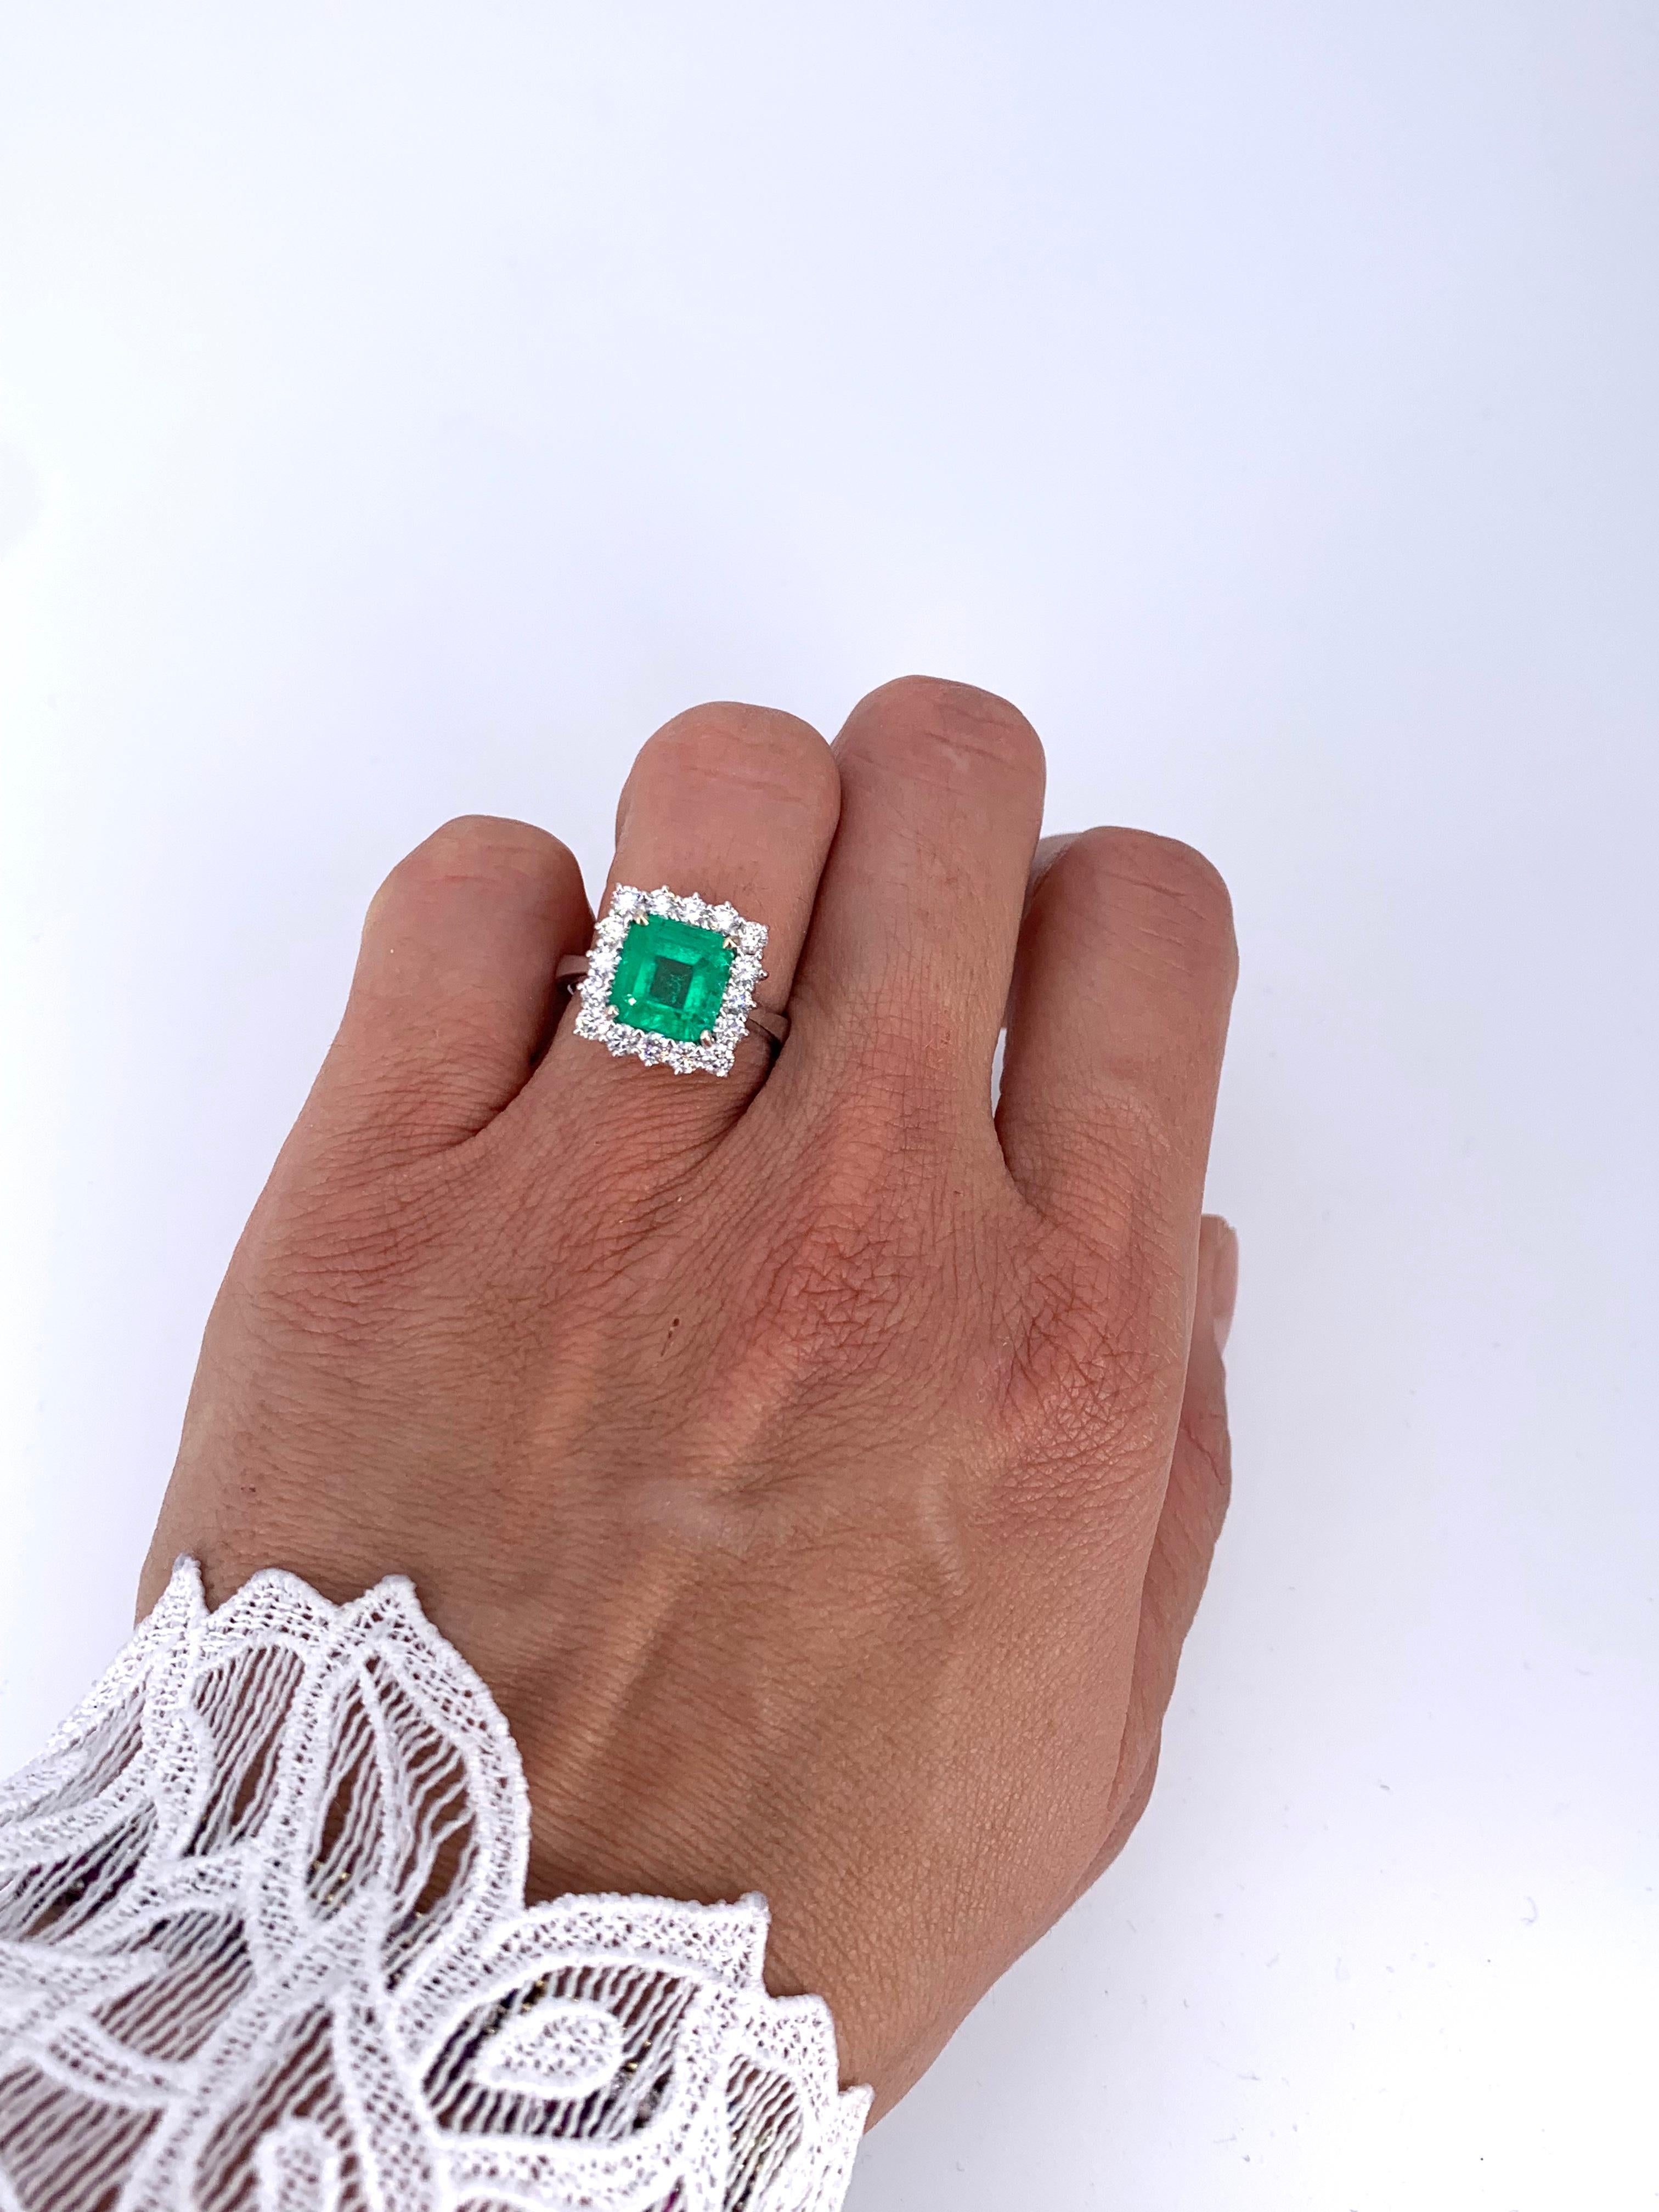 3.26 Carat Colombian Emerald and 1.02 Carat 18 Kt White Gold Halo Diamond Ring  2